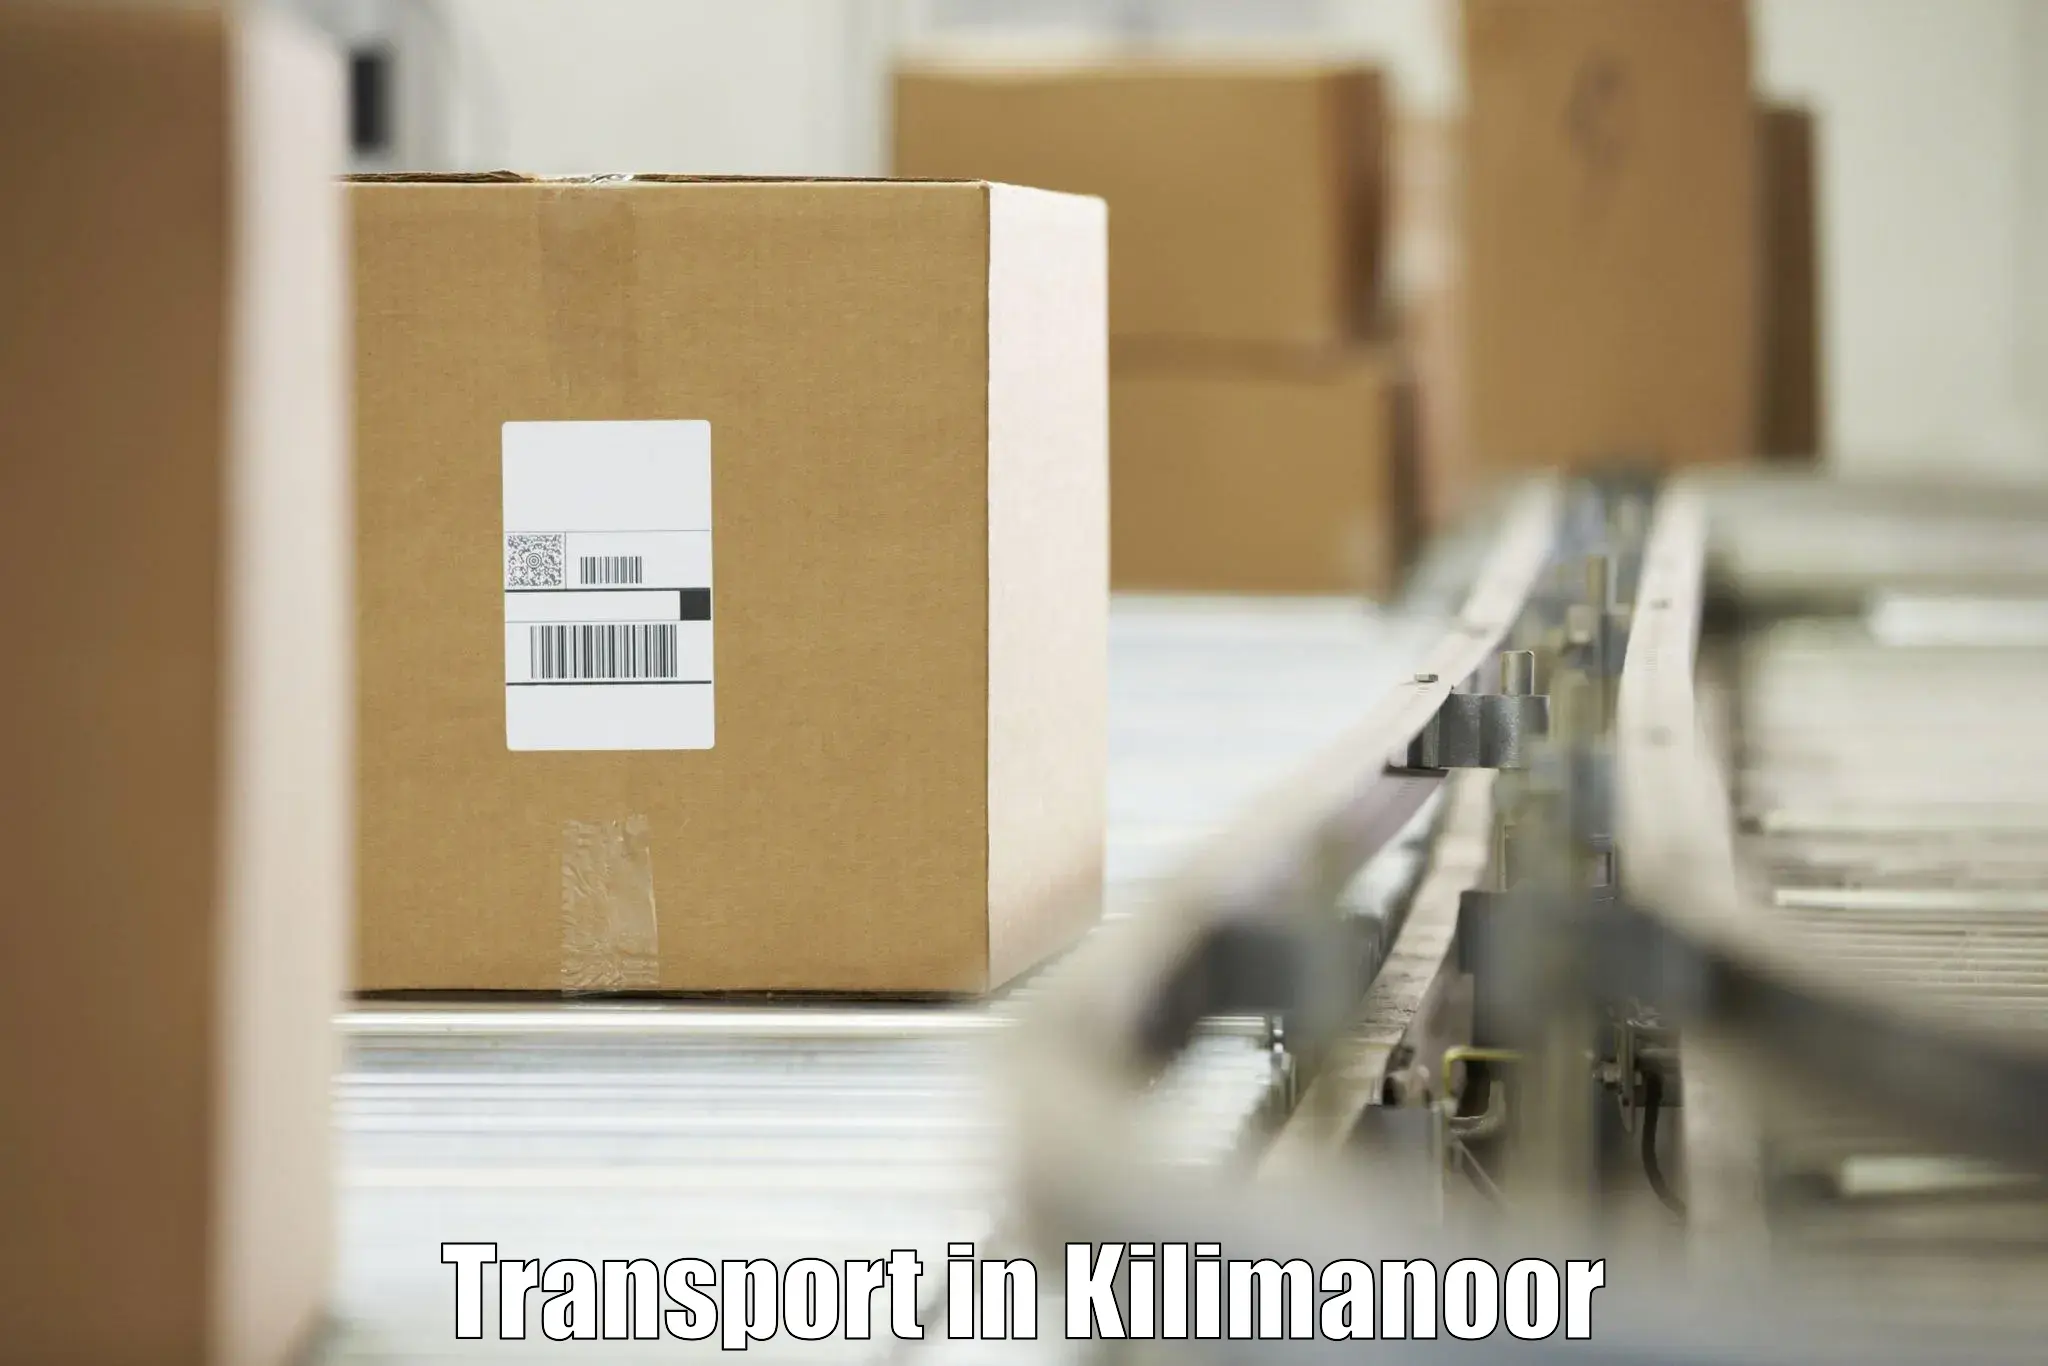 Vehicle transport services in Kilimanoor